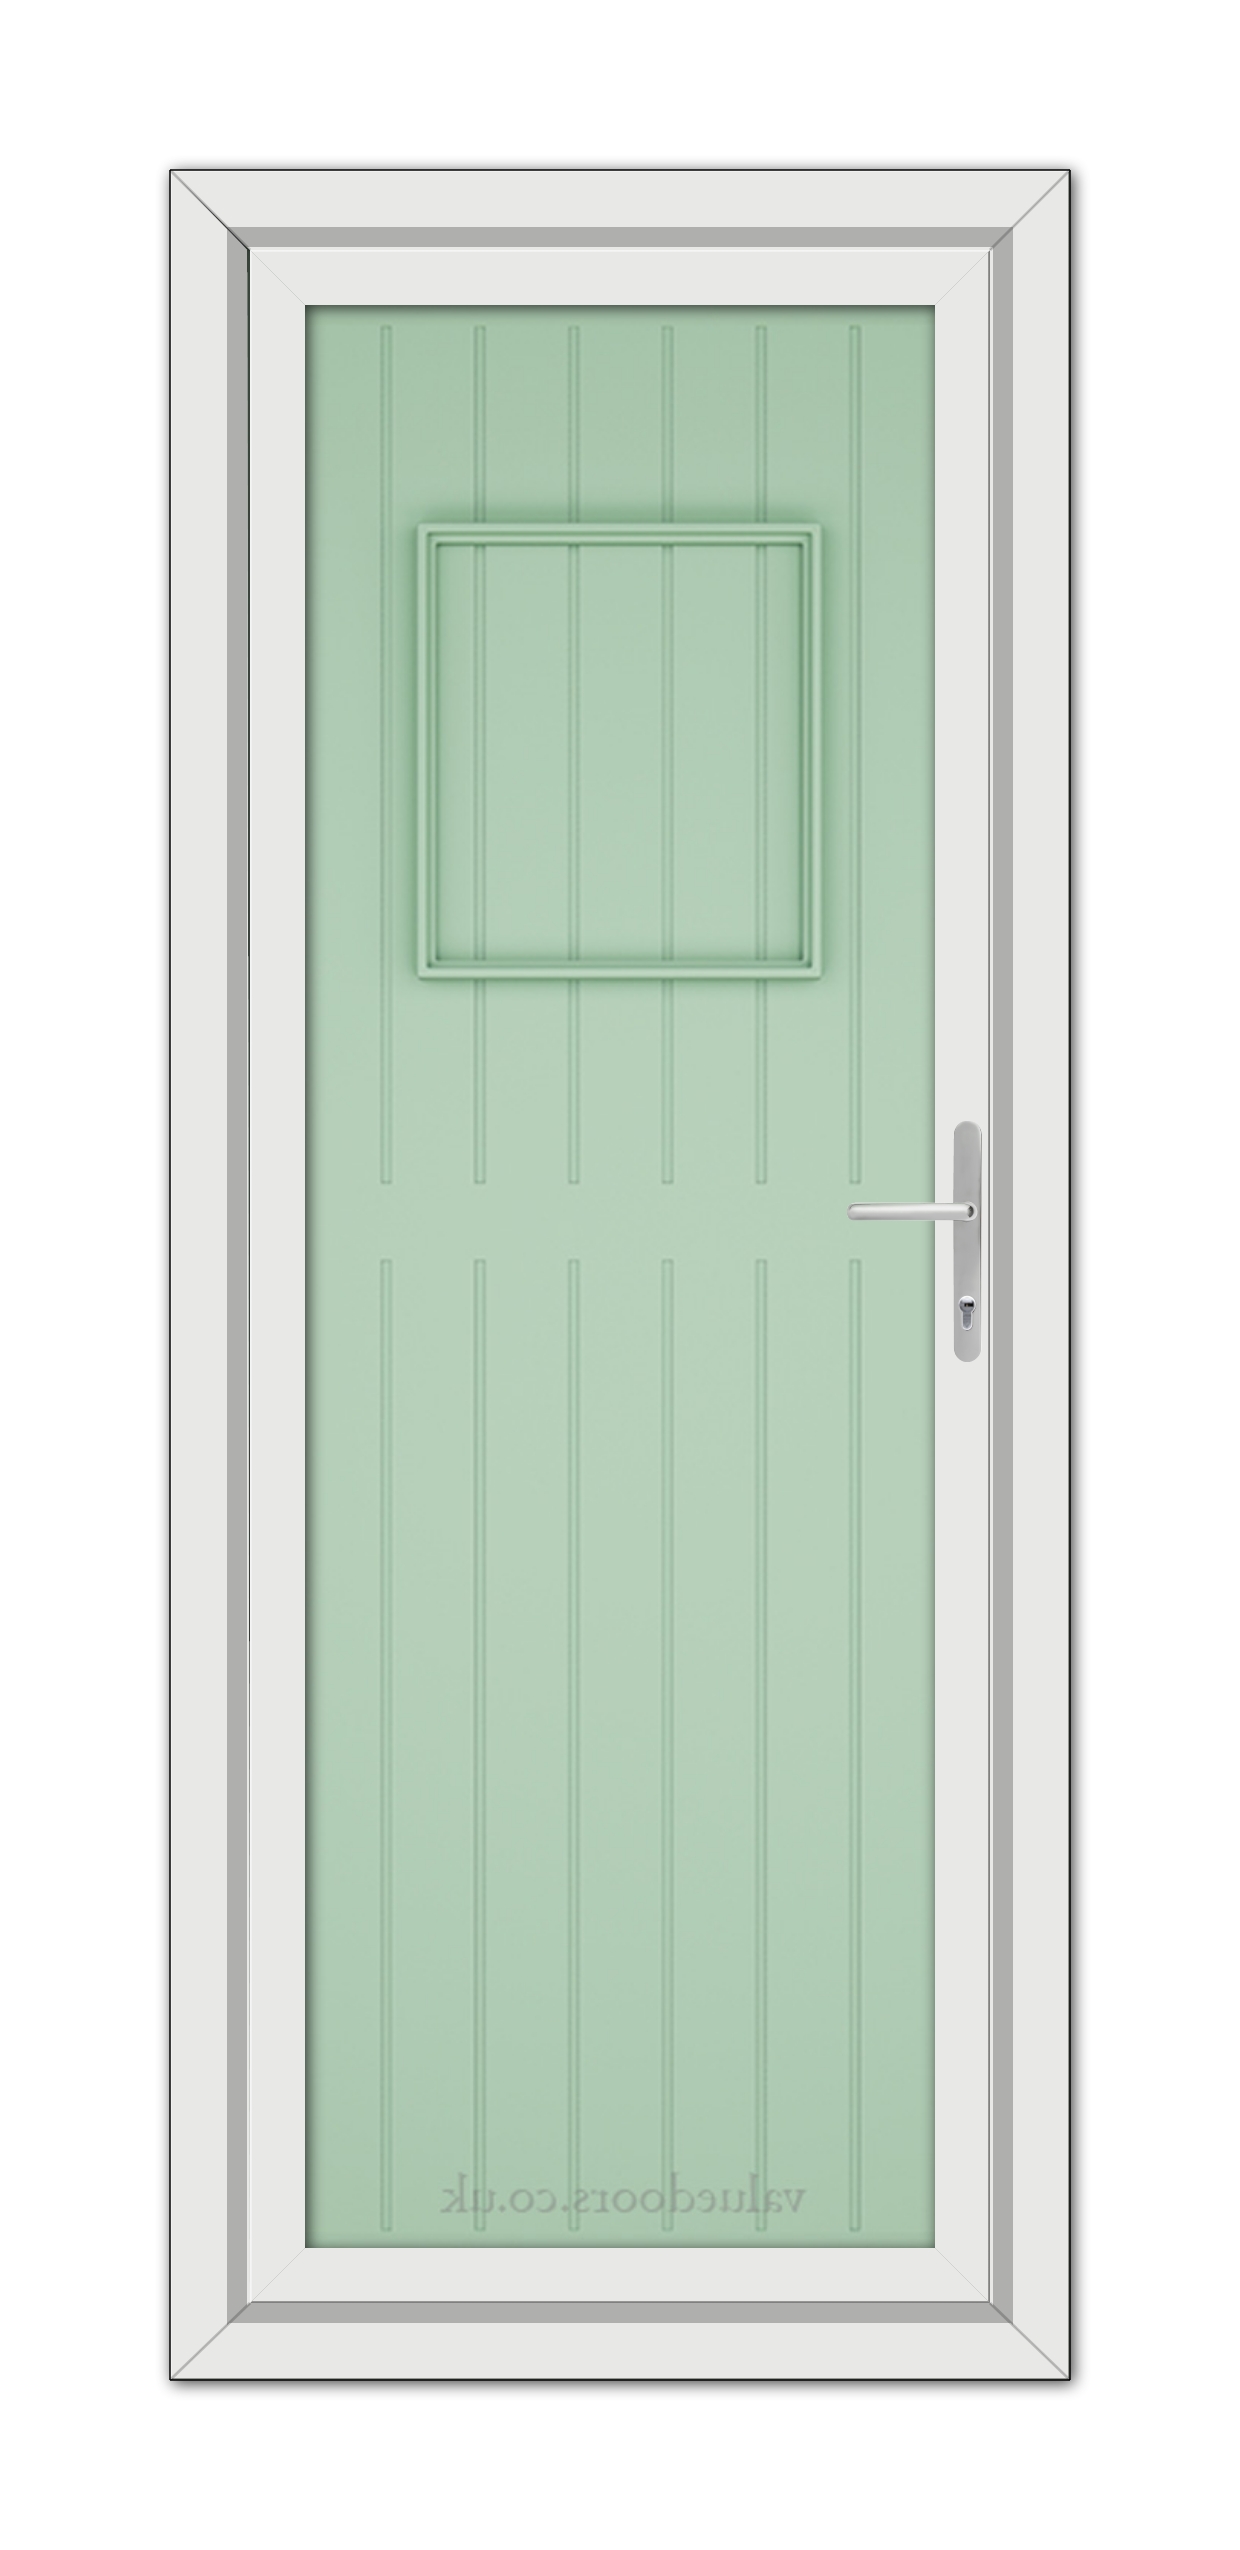 A Chartwell Green Chatsworth Solid uPVC door with a rectangular window and a silver handle, set within a white frame.